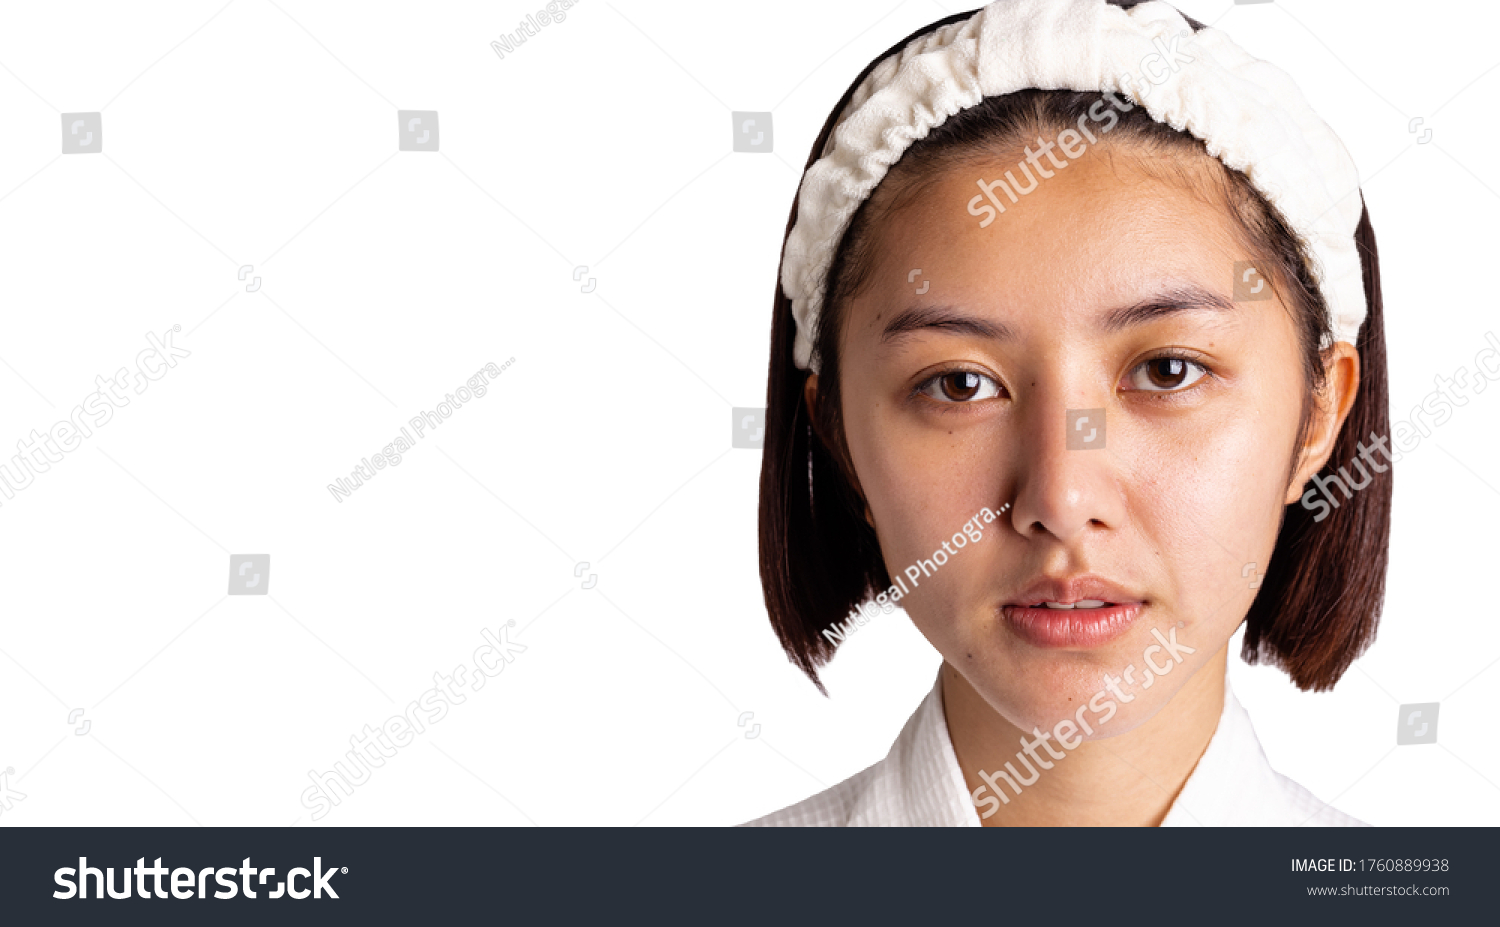 Beautiful asian woman gets freckles, and dull skin on her face. Pretty young woman get problems of facial skin. She looks unhappy. isolated on white, copy space. Asia lady get bare face no makeup   #1760889938